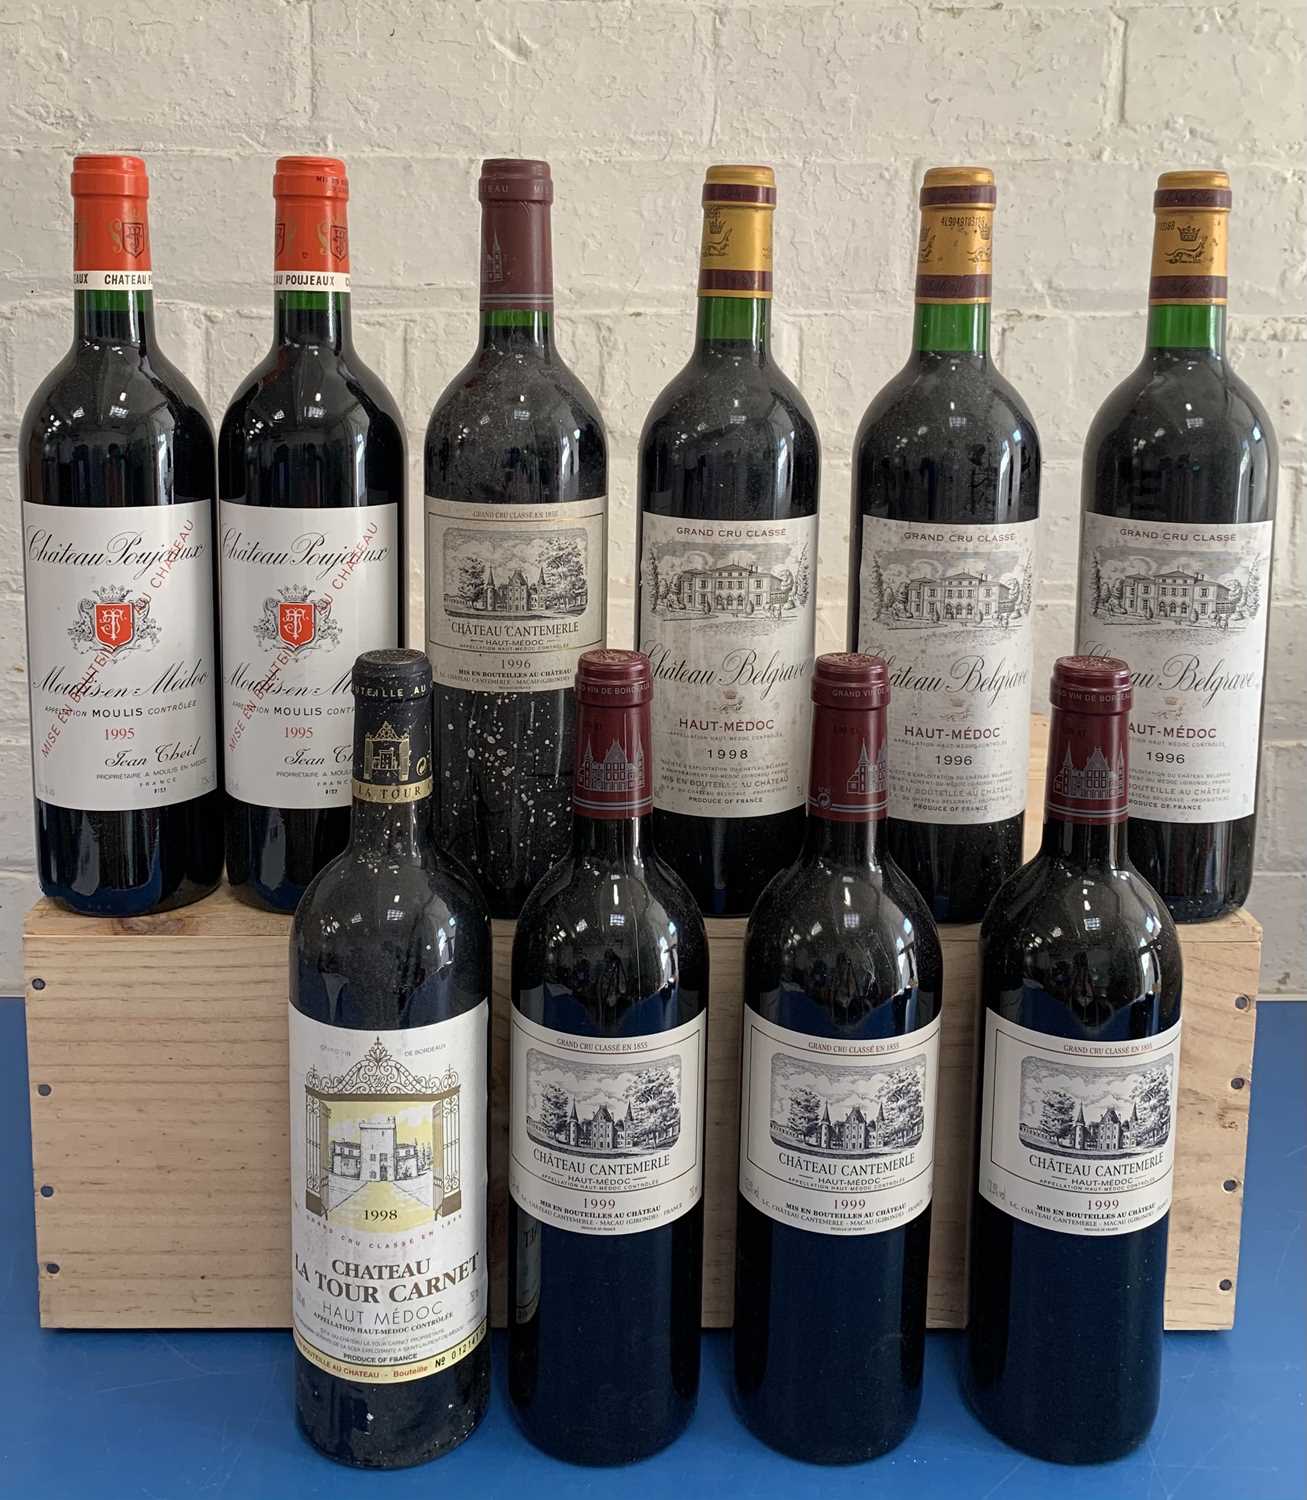 Lot 36 - 10 Bottles Mixed Parcel of fine Classified Growth and Cru Bourgeois Clarets